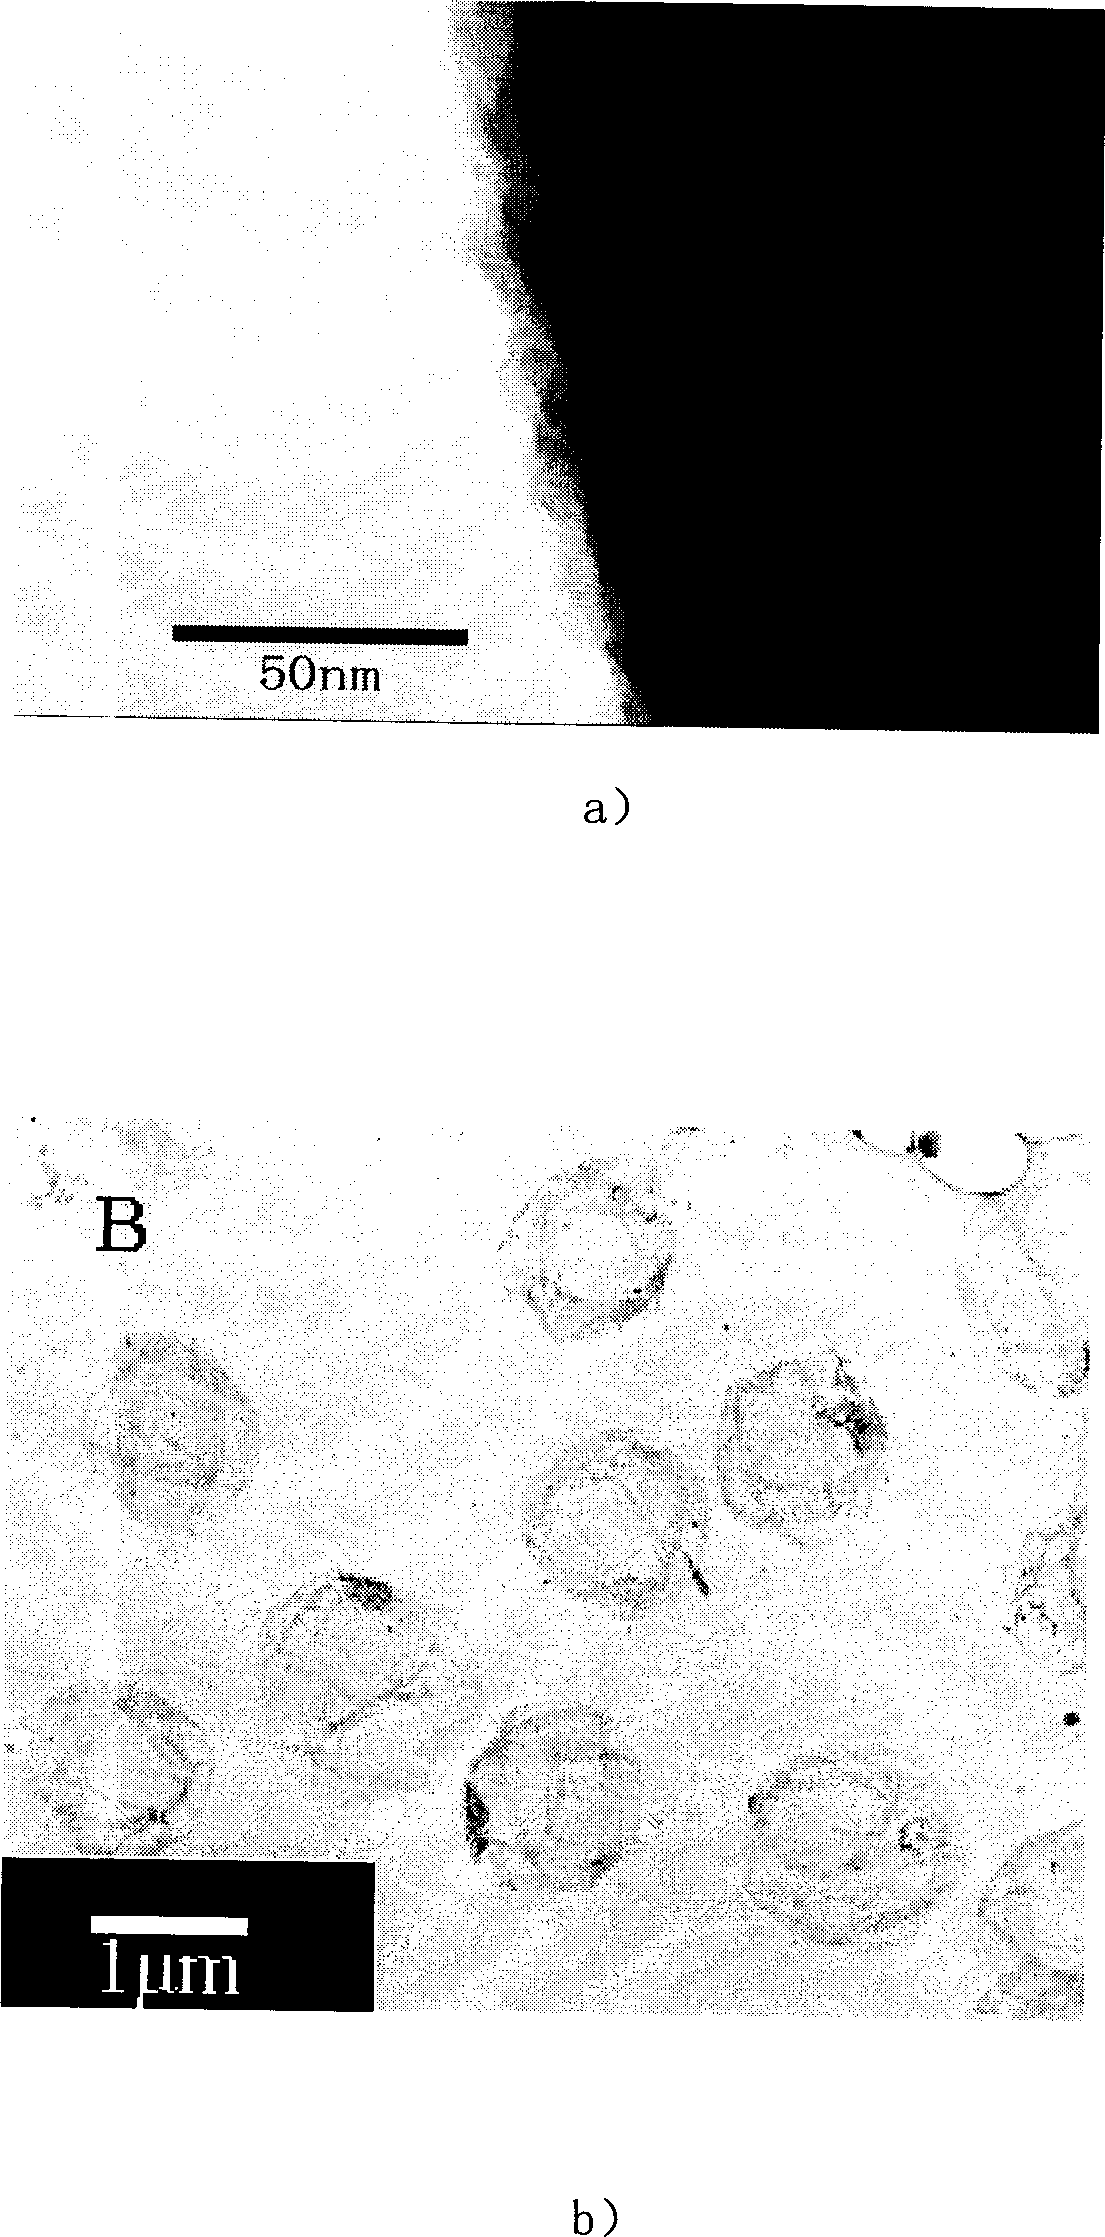 Layer-by-layer microcapsule assembling process based on mutual covalent action